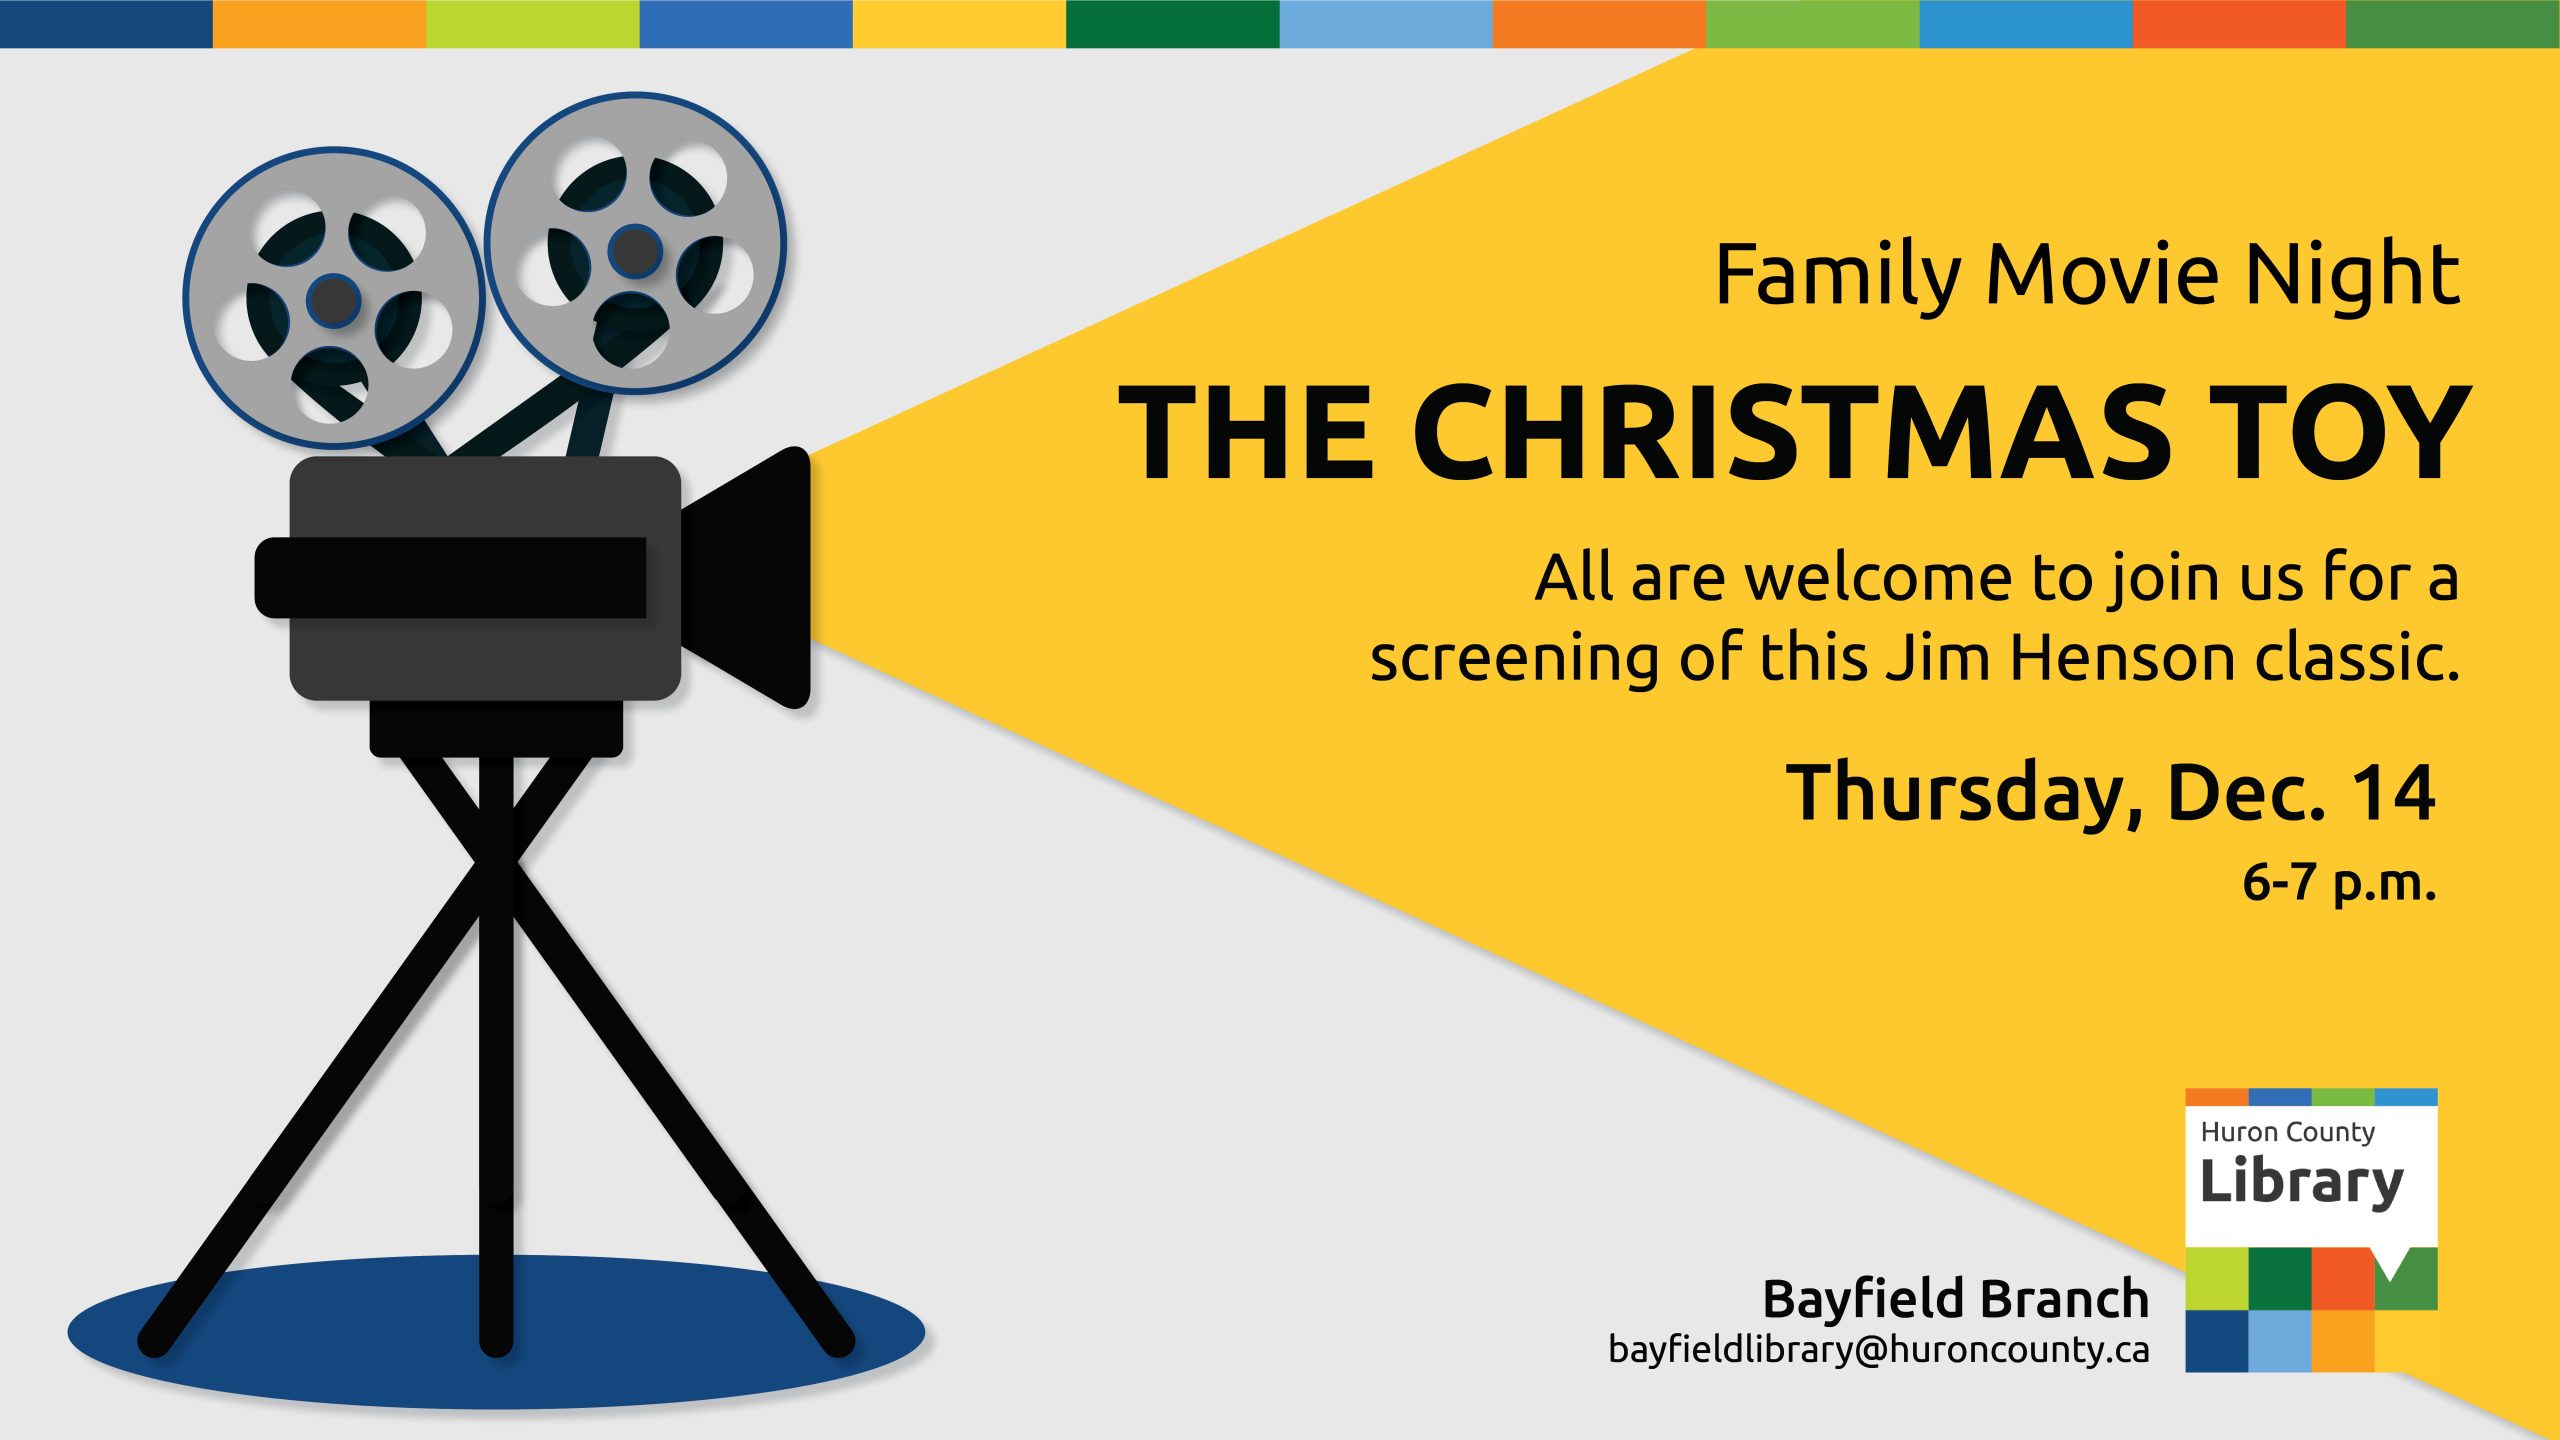 Illustration of a movie projector with text promoting Christmas movie at the Bayfield branch